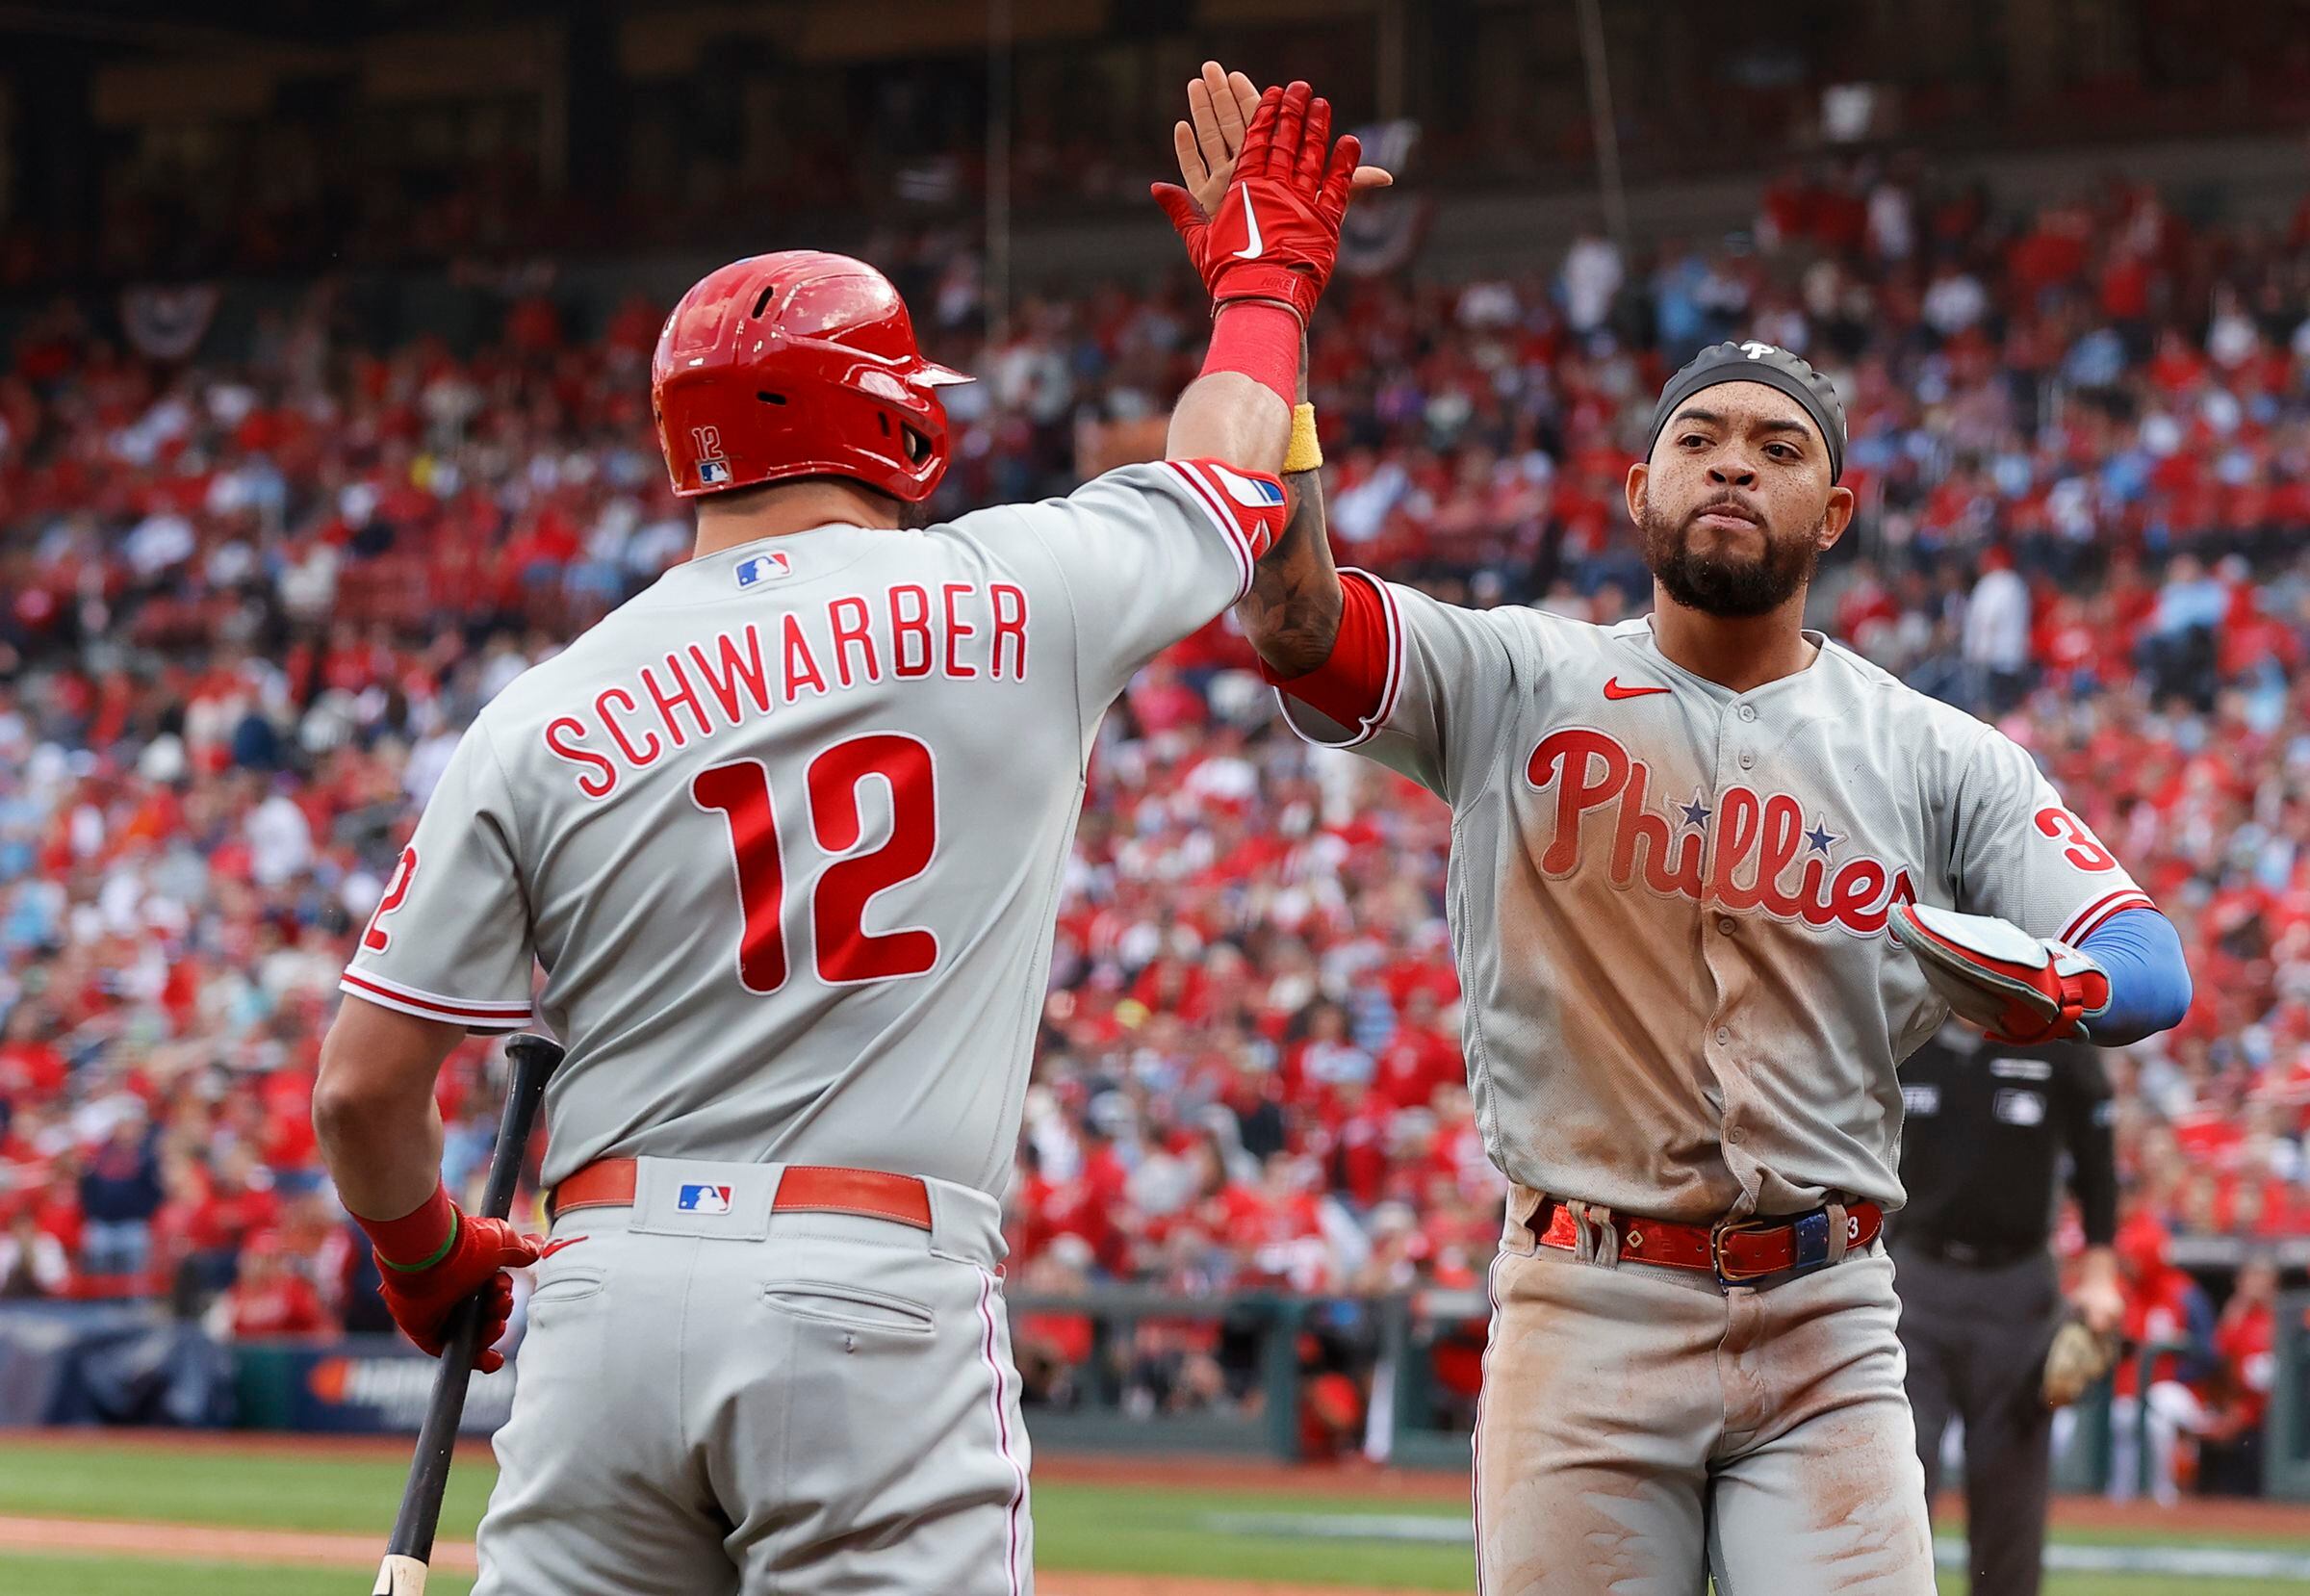 Larry Bowa on the Phillies' deep lineup, potential MVPs & playoff